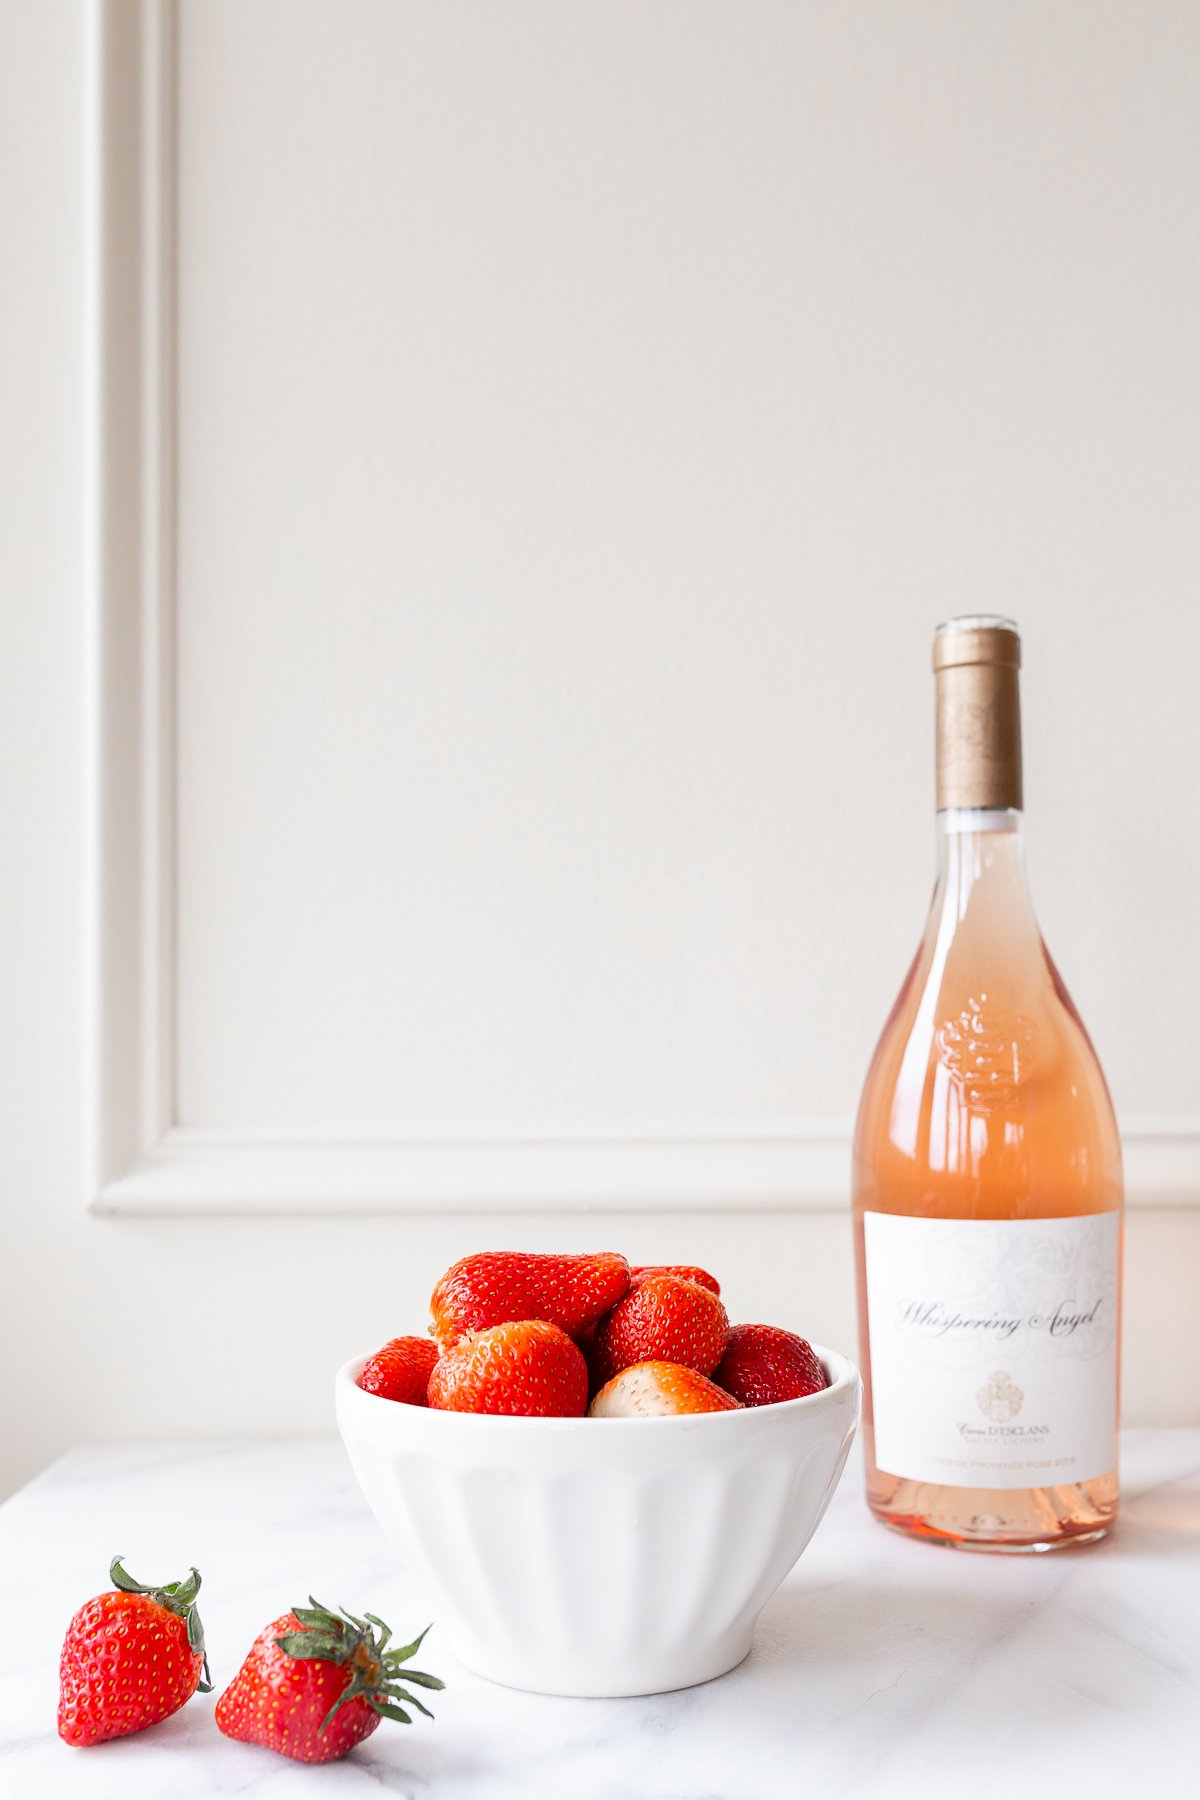 rosé marinated drunken strawberries in a white bowl, bottle of wine in the background.